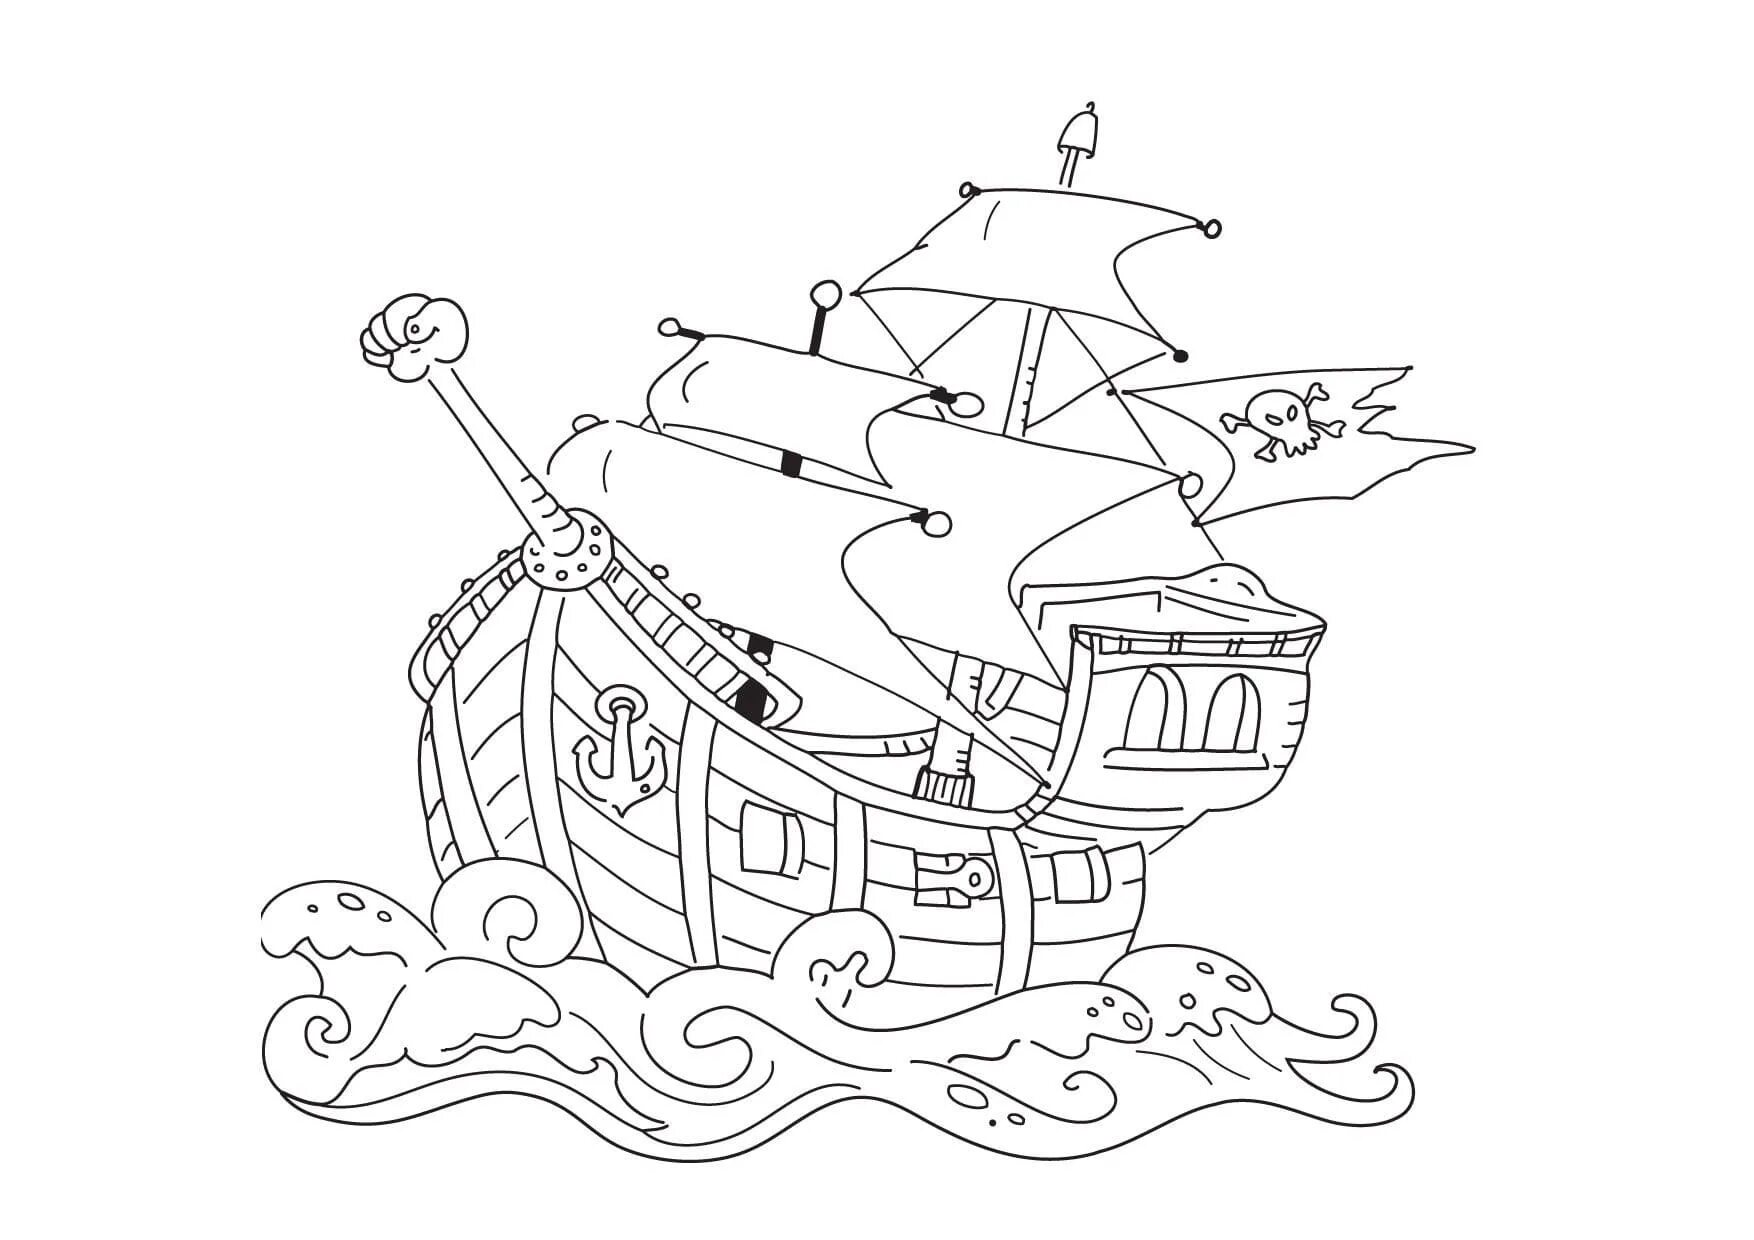 Gorgeous pirate ship coloring book for kids